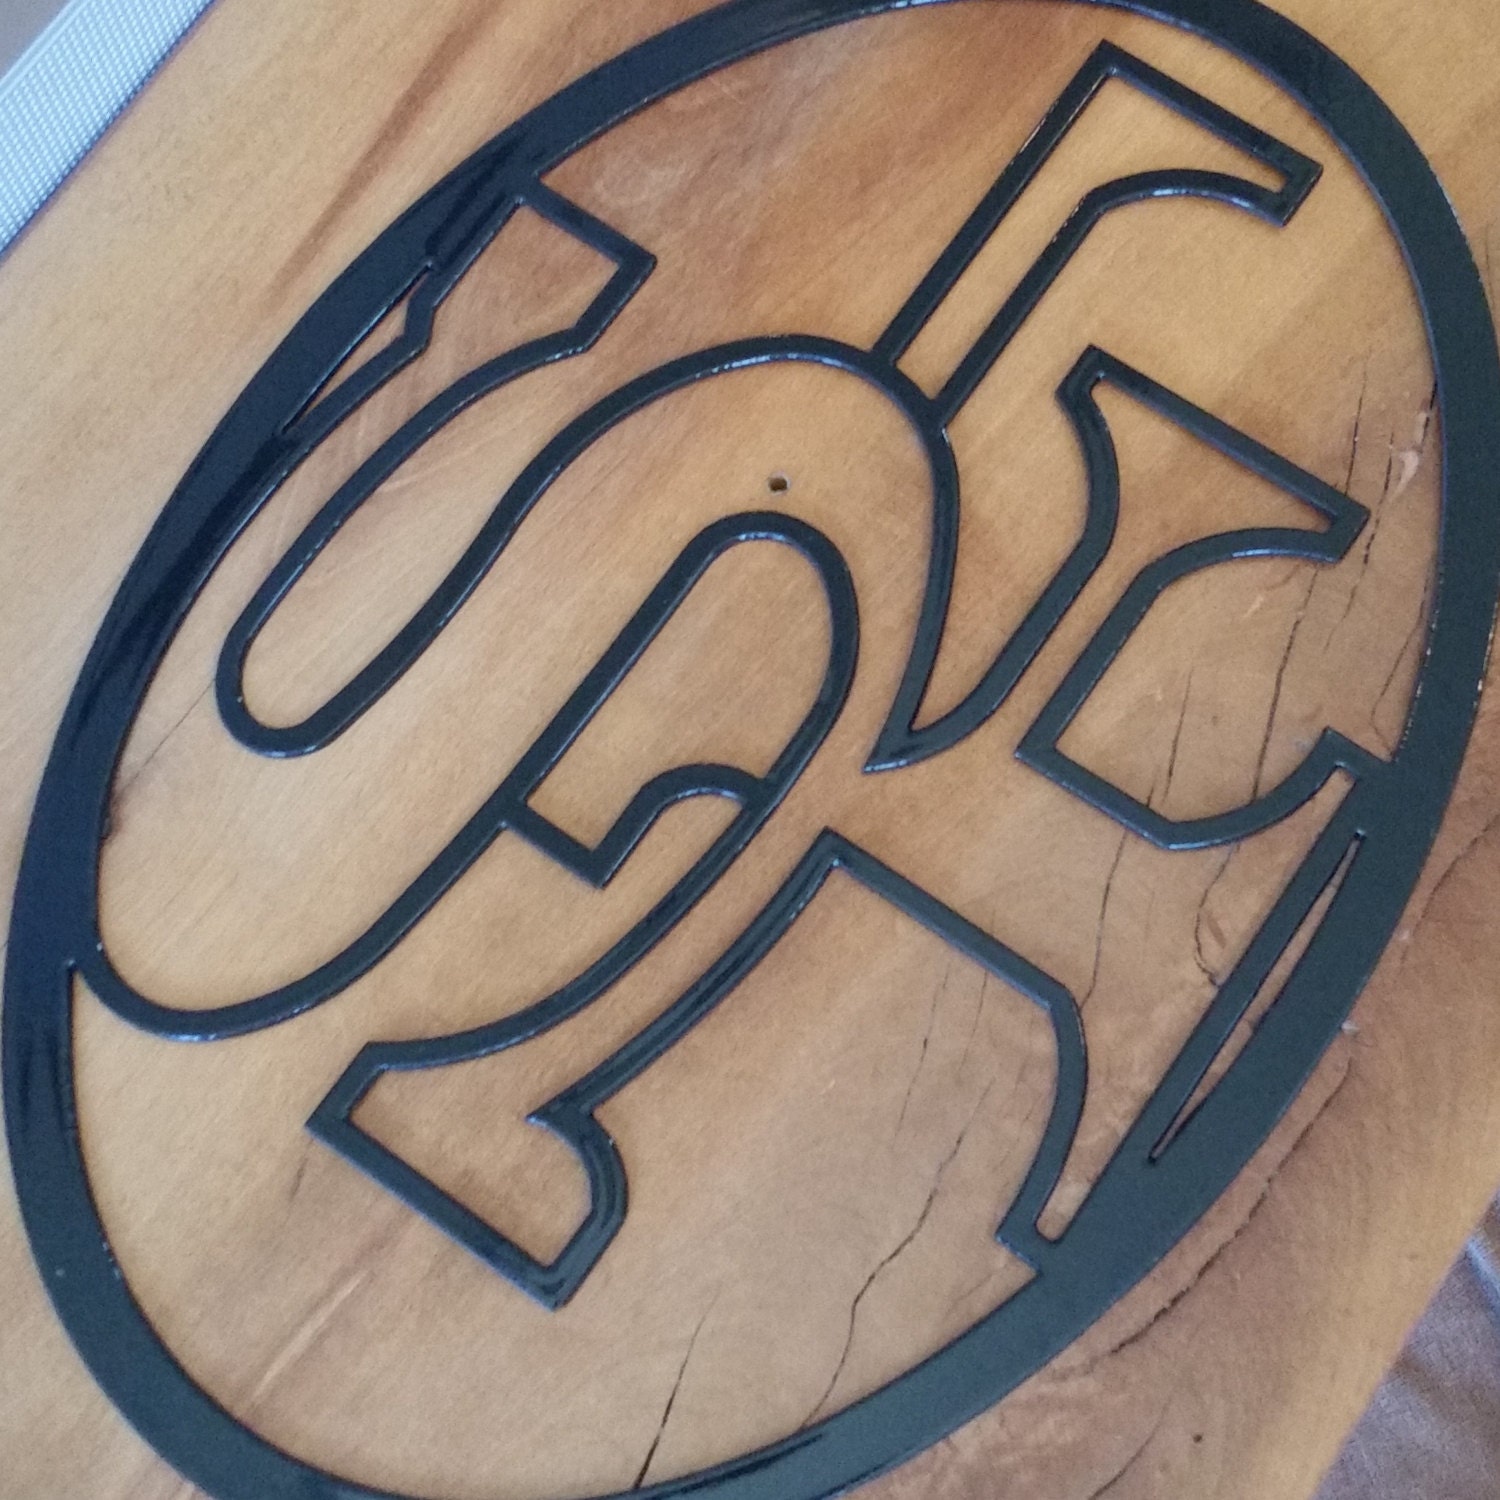 Recycled Metal Black 49ers Logo Wall Decor San by fttdesign